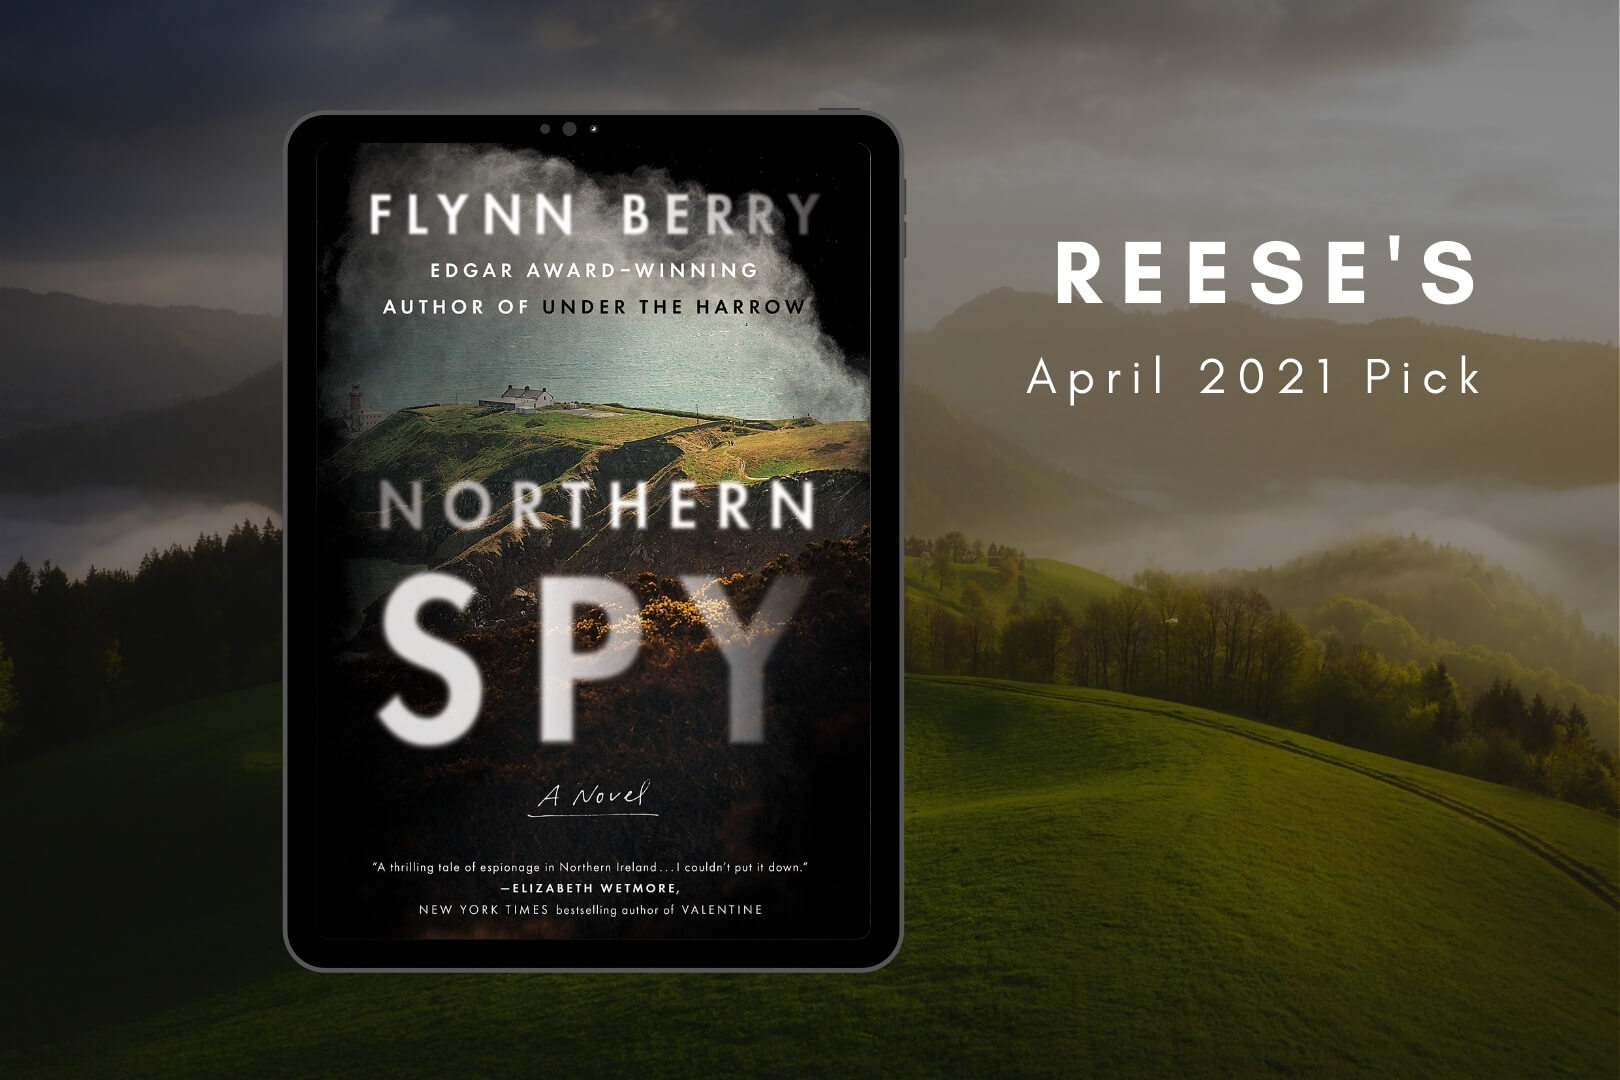 Reese’s April 2021 Book Club Pick is Northern Spy by Flynn Berry